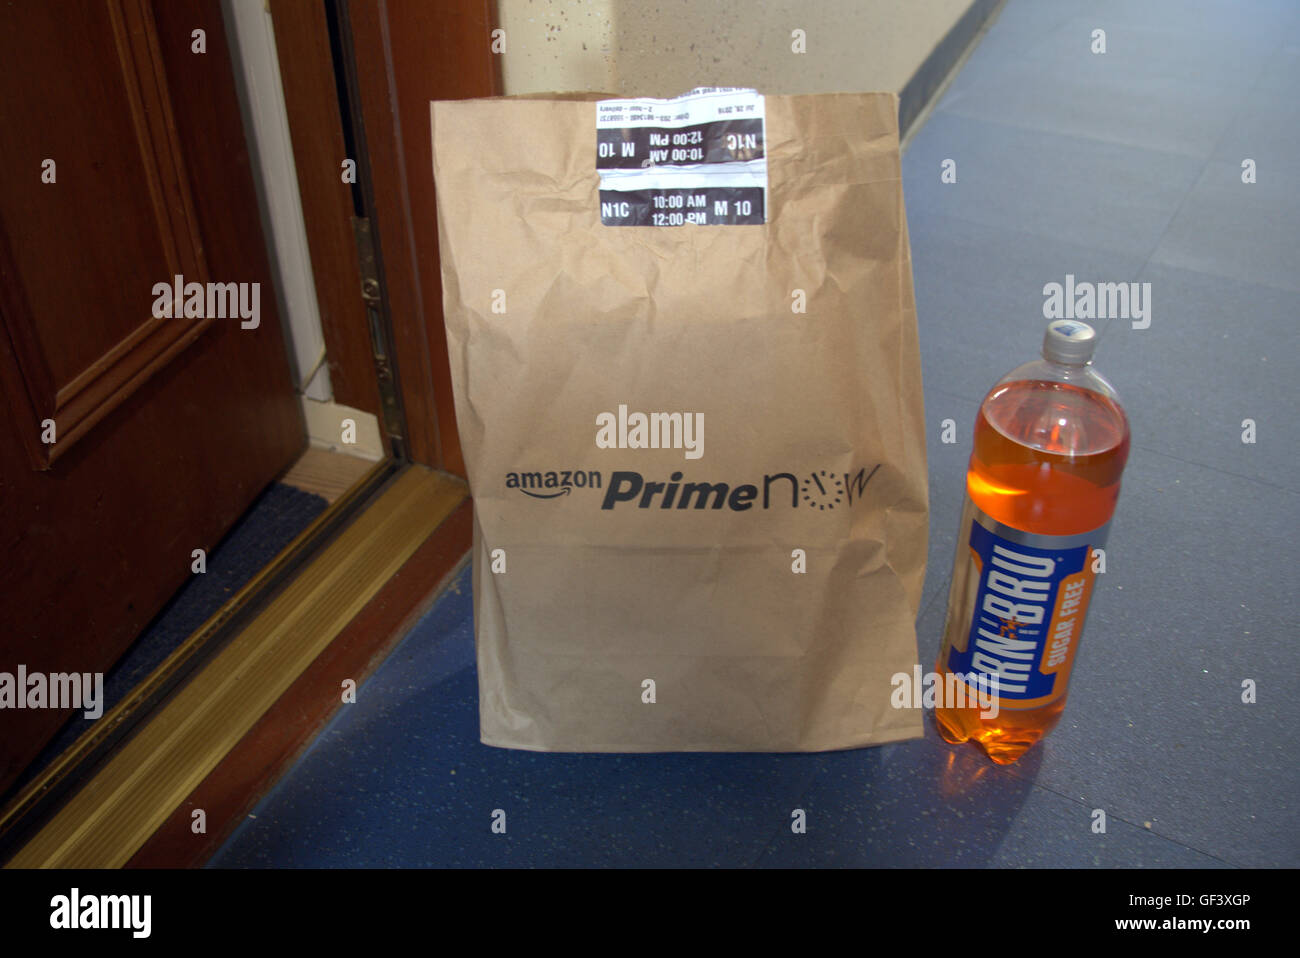 Glasgow, Scotland, UK 28th July 2016. Amazon‘s one hour delivery service expands to Scotland in selected postcodes in Glasgow and the town of Paisley. Glasgow becomes the first Scottish city for it’s one hour “Prime Now” service for its Prime customers. Selected other adjoining areas can access a two hour service To celebrate its Scottish service it gave away free Irn-Bru the local iconic soft drink and a Five pounds discount code. Credit: Gerard Ferry/Alamy Live News Stock Photo